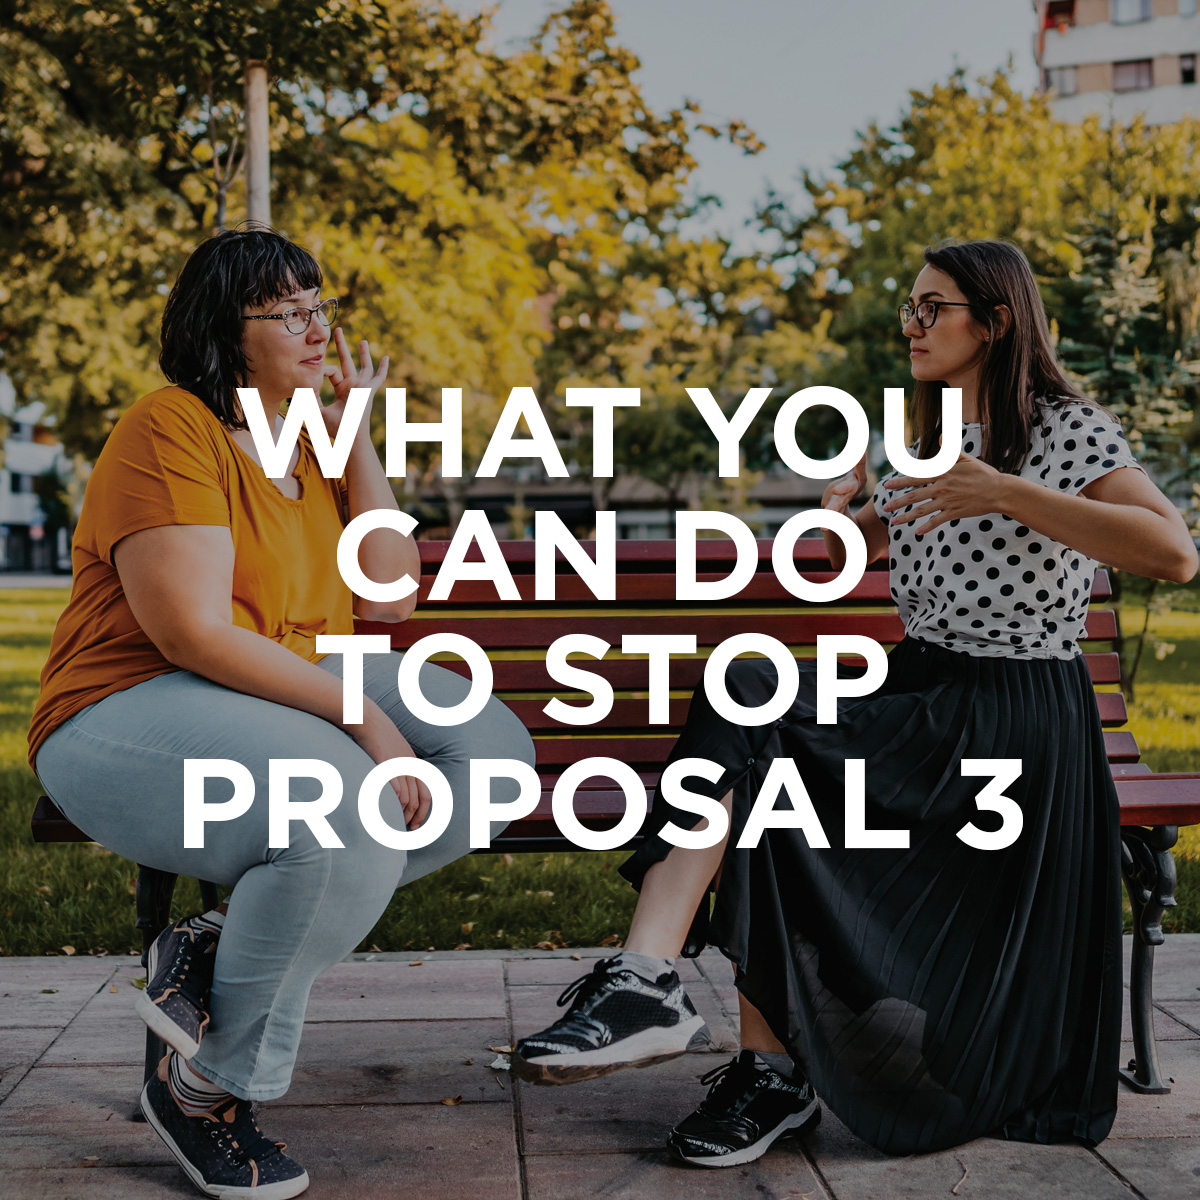 What can you do to stop Proposal 3 from passing?